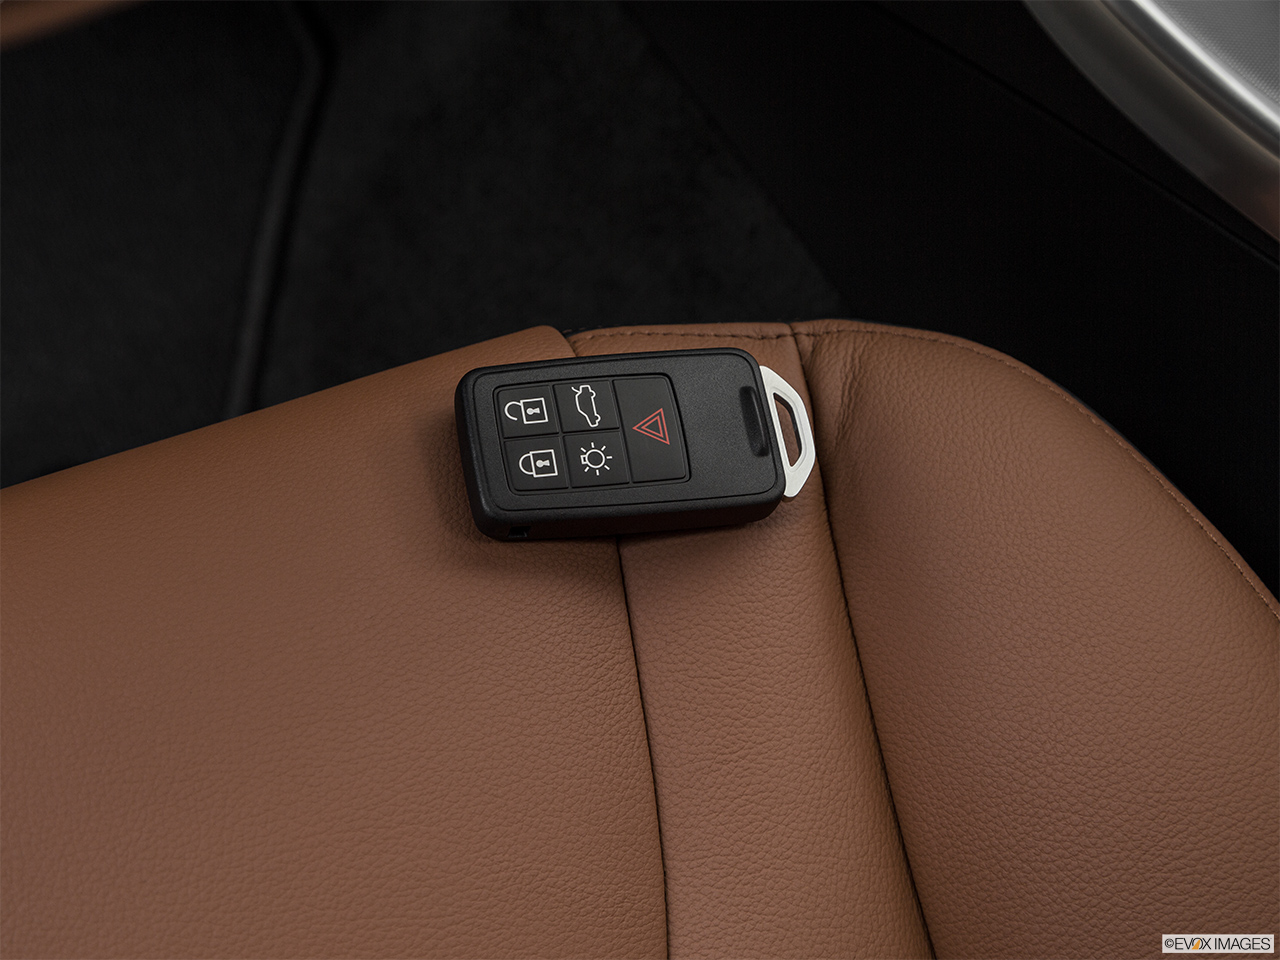 2017 Volvo S60 T5 Inscription Key fob on driver's seat. 